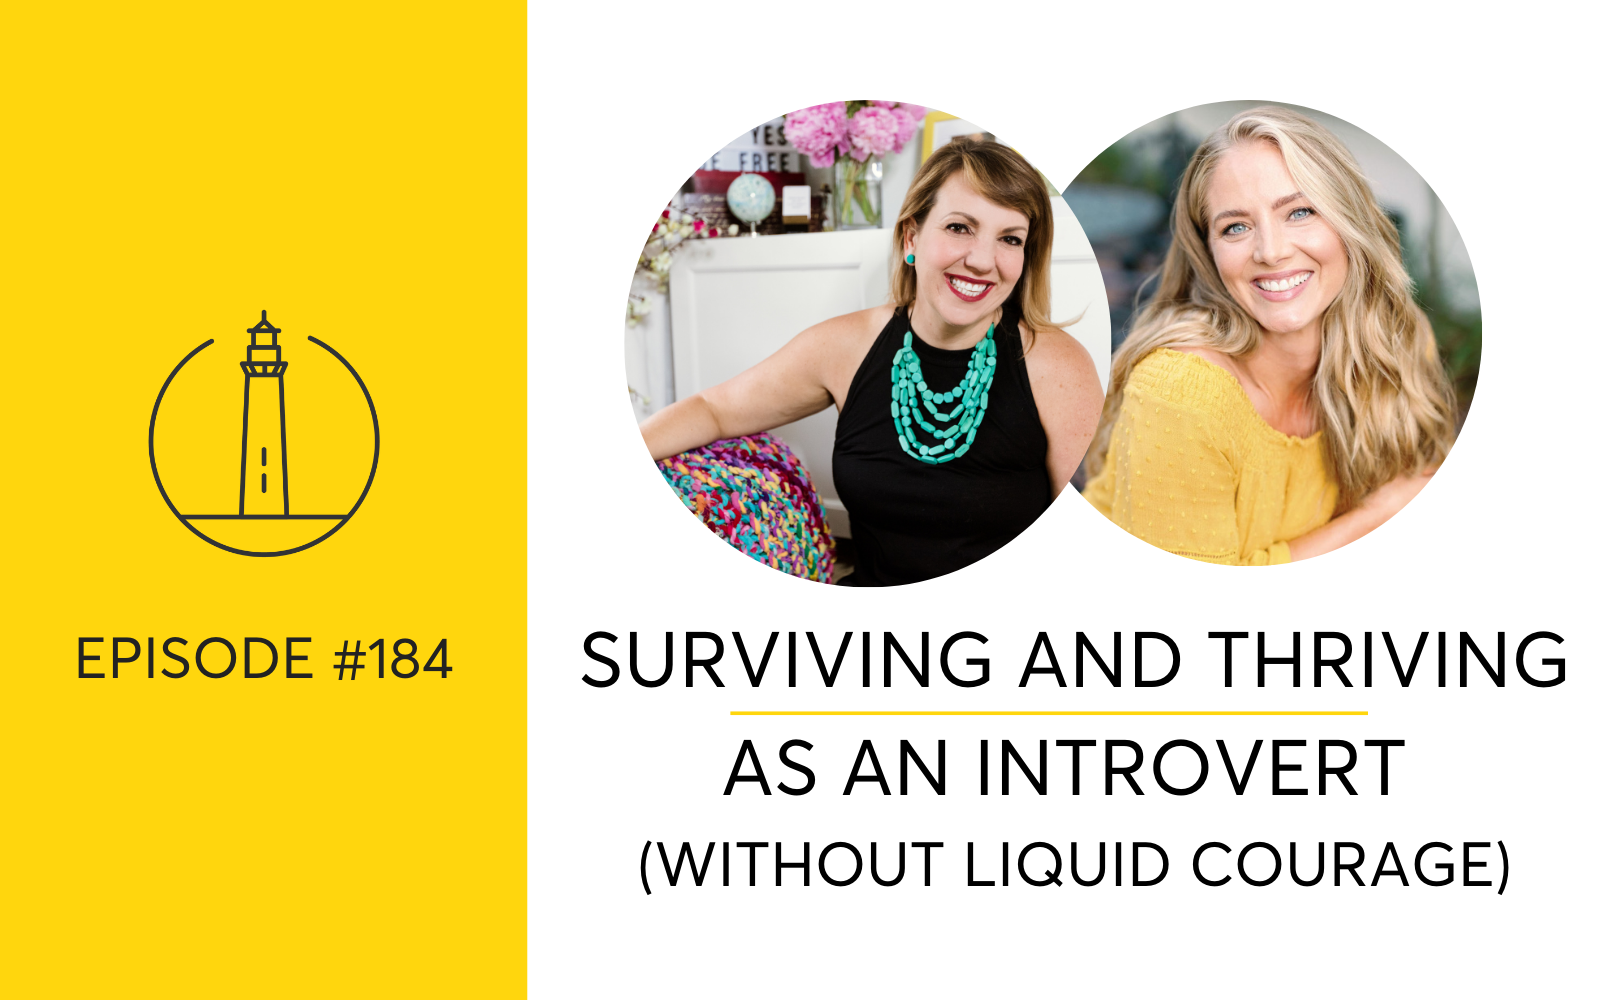 Are You An Introvert? How To Socialize Without Liquid Courage